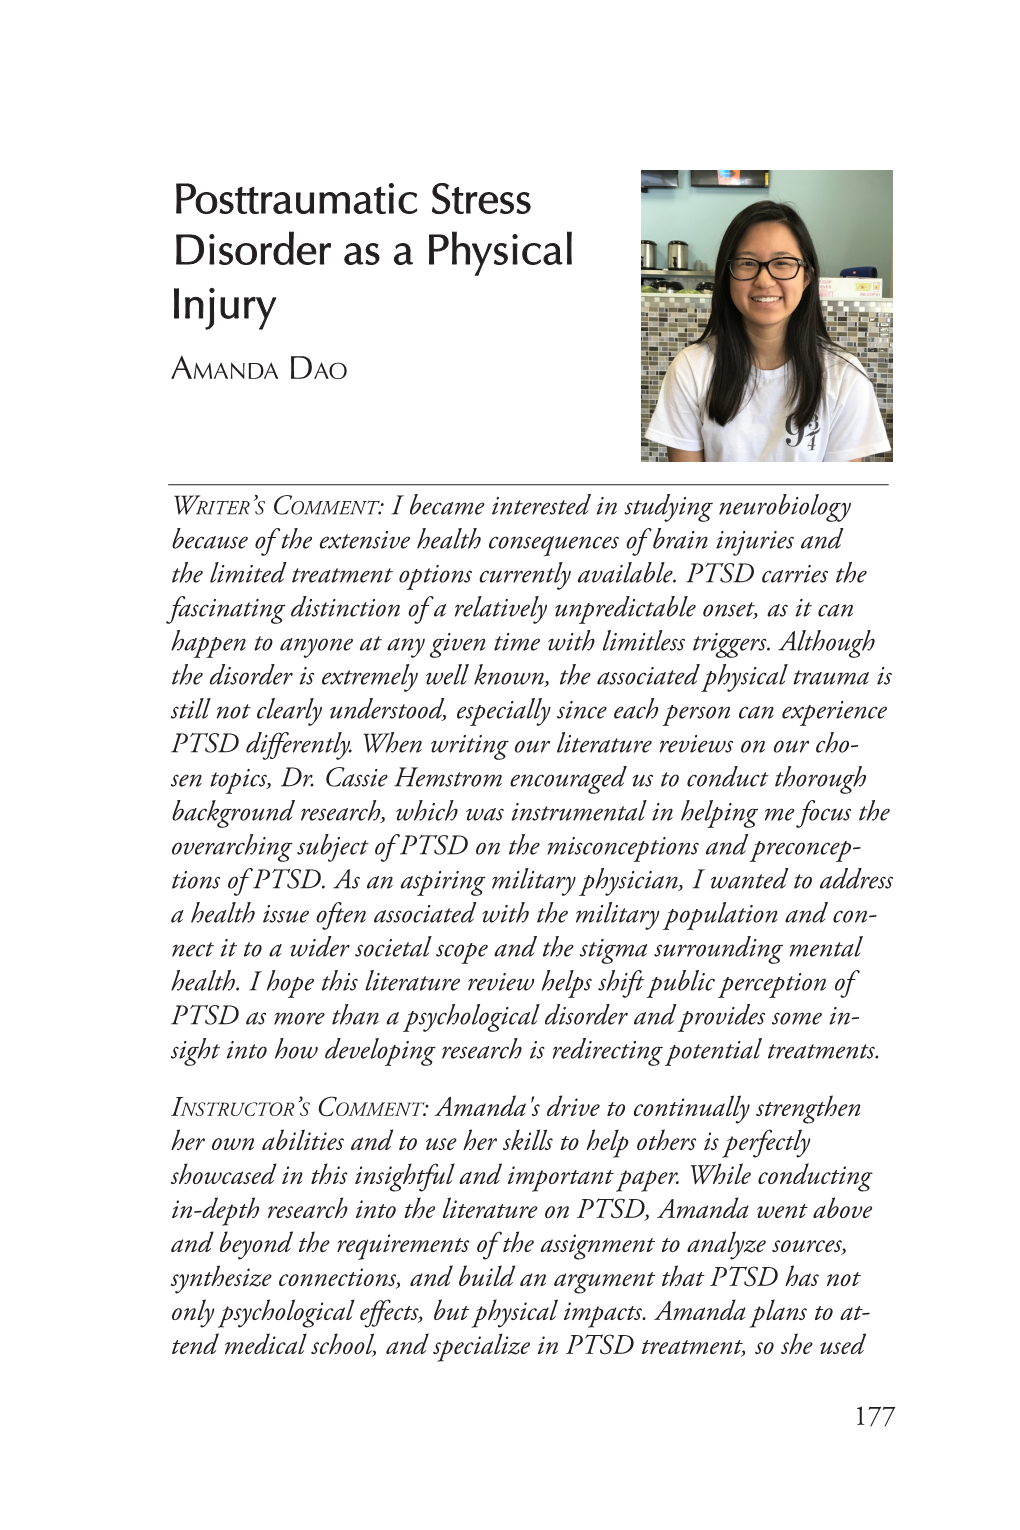 Posttraumatic Stress Disorder As a Physical Injury